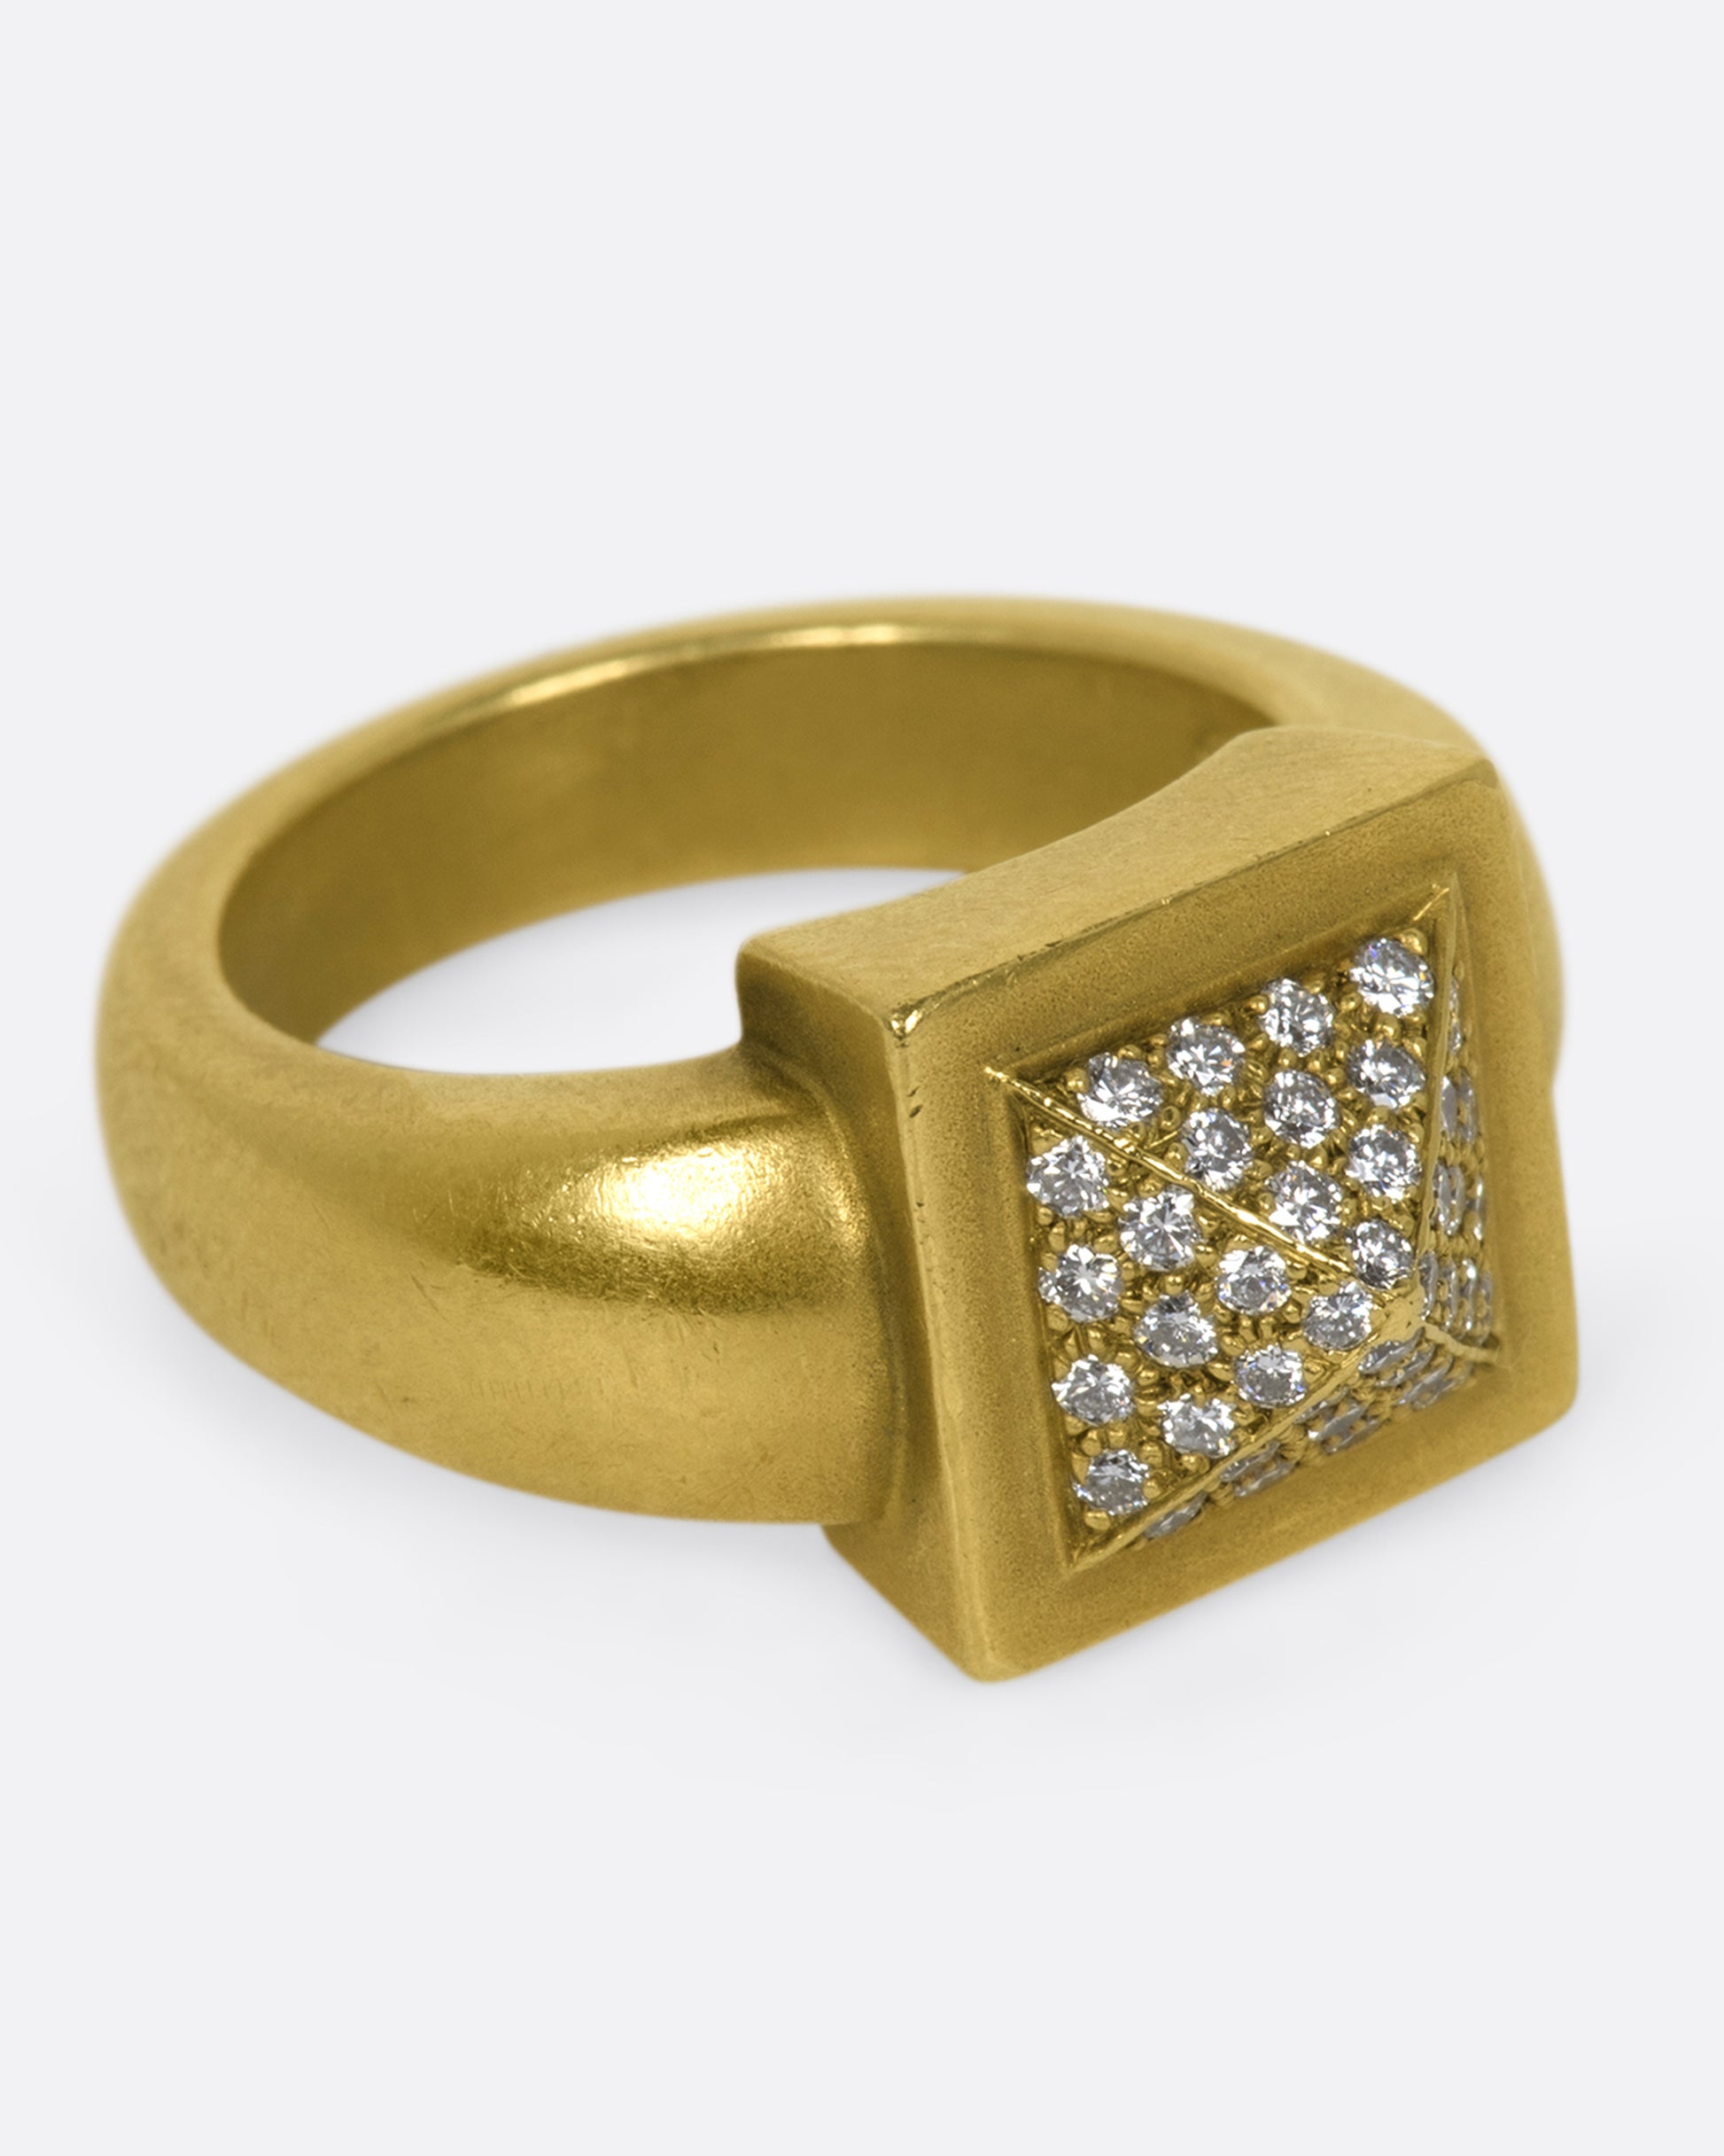 A heavy rounded gold ring with a square, pointed face covered in diamonds.